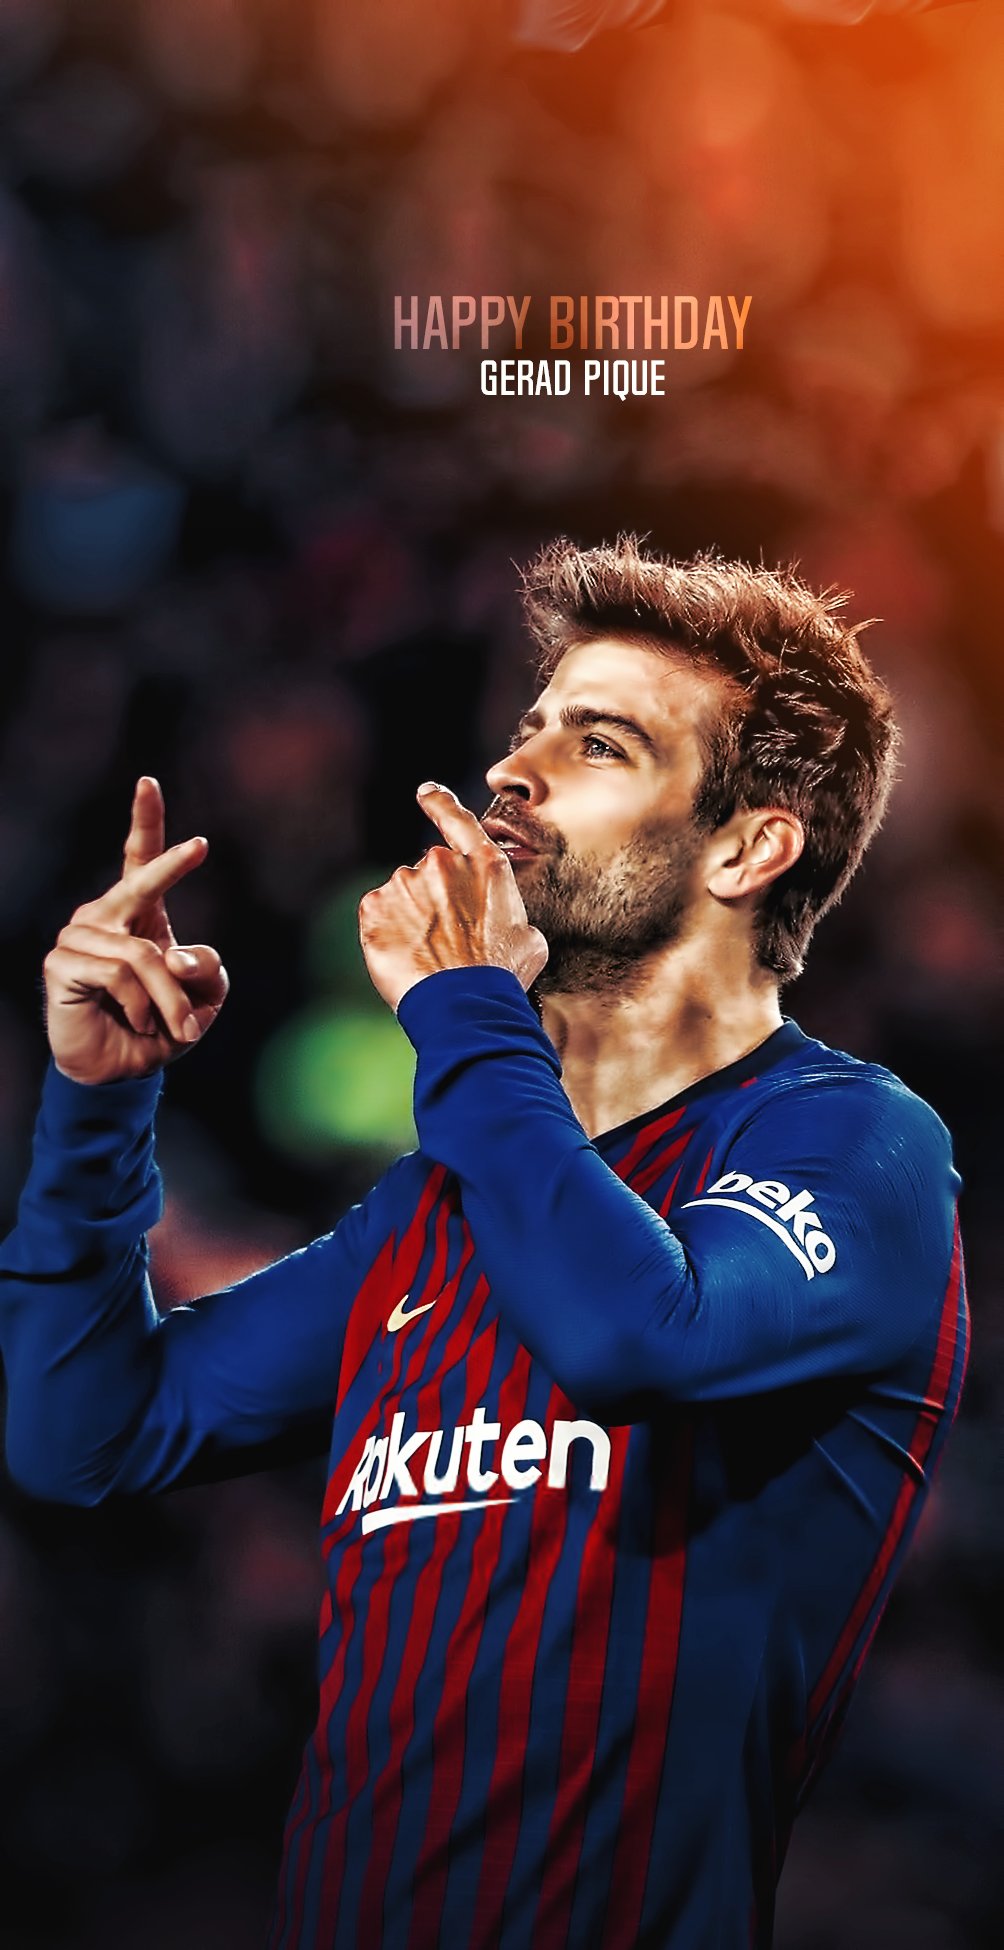  birthday Gerard Piqué   More with work in Barcelona age is just a number  